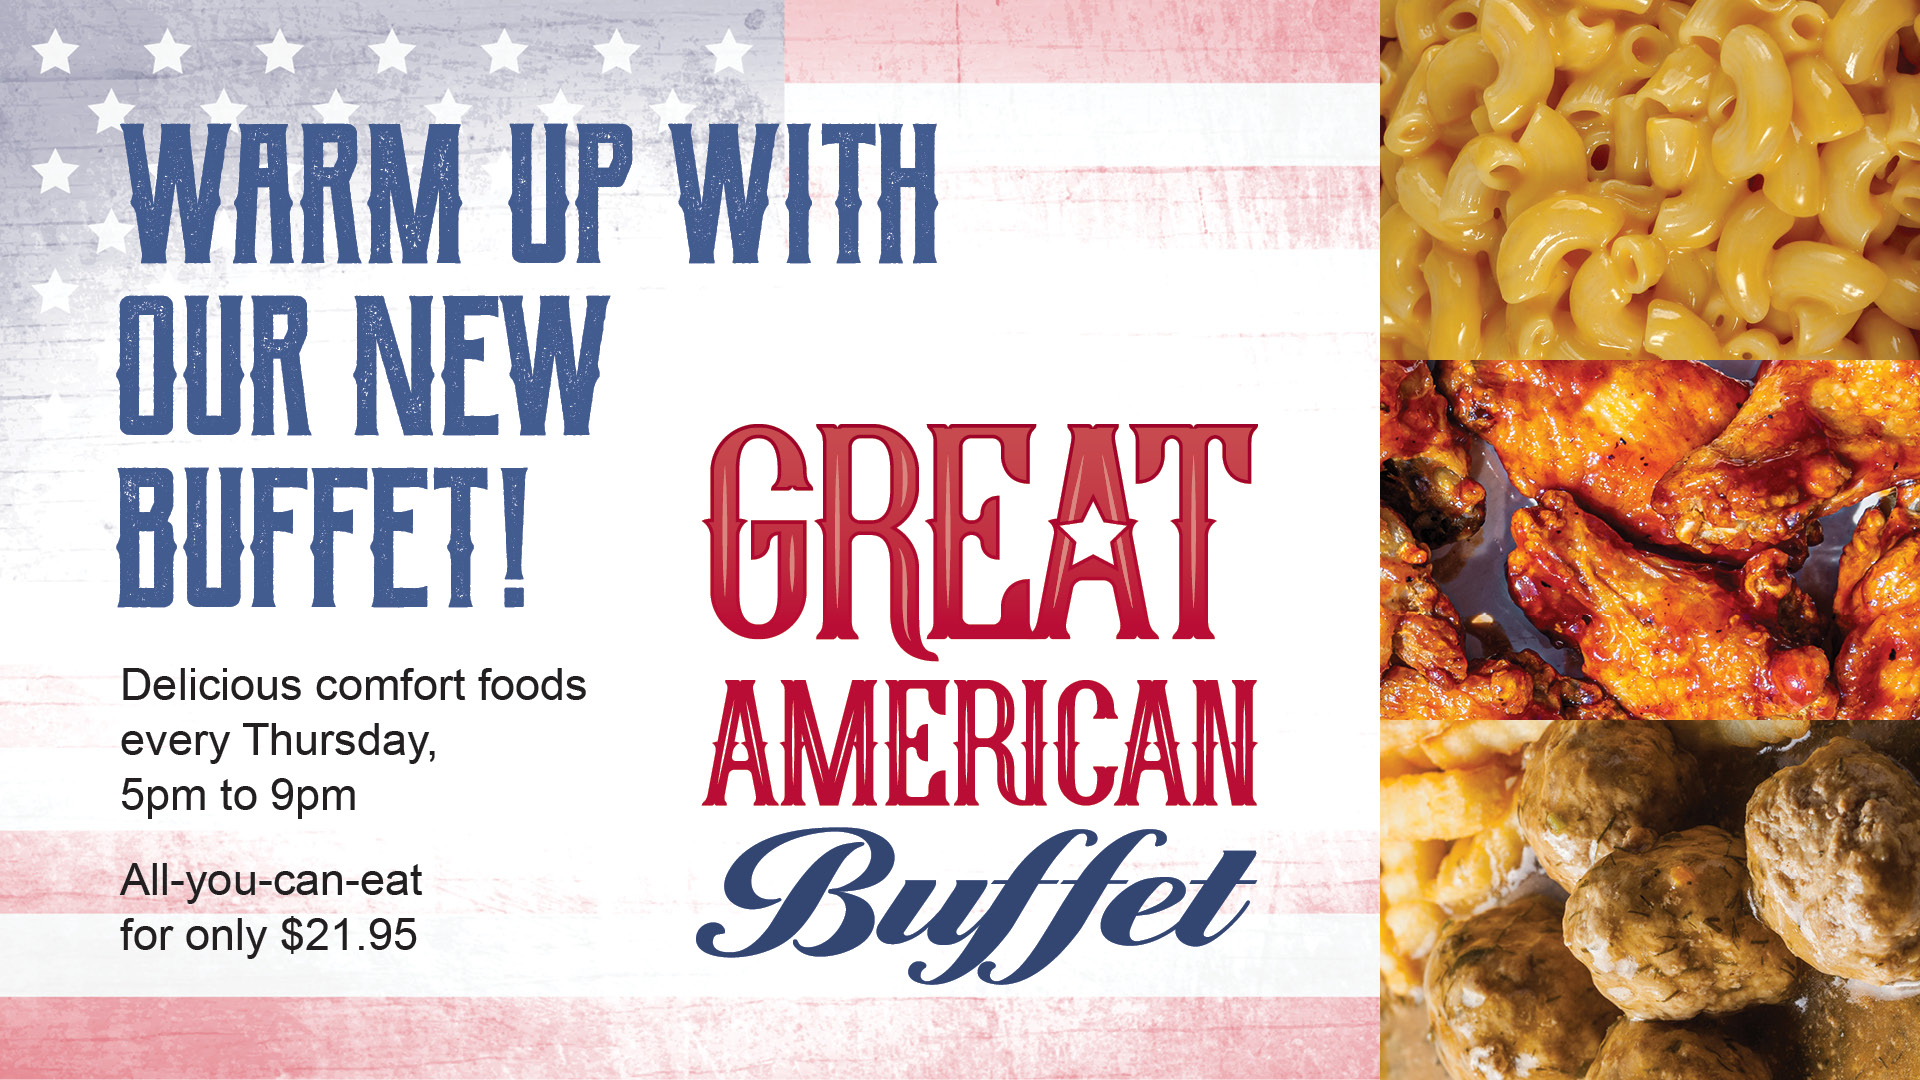 Great American Buffet: warm up with our new buffet! Delicious comfort foods every Thursday, 5pm to 9pm. All-you-can-eat for only $21.95